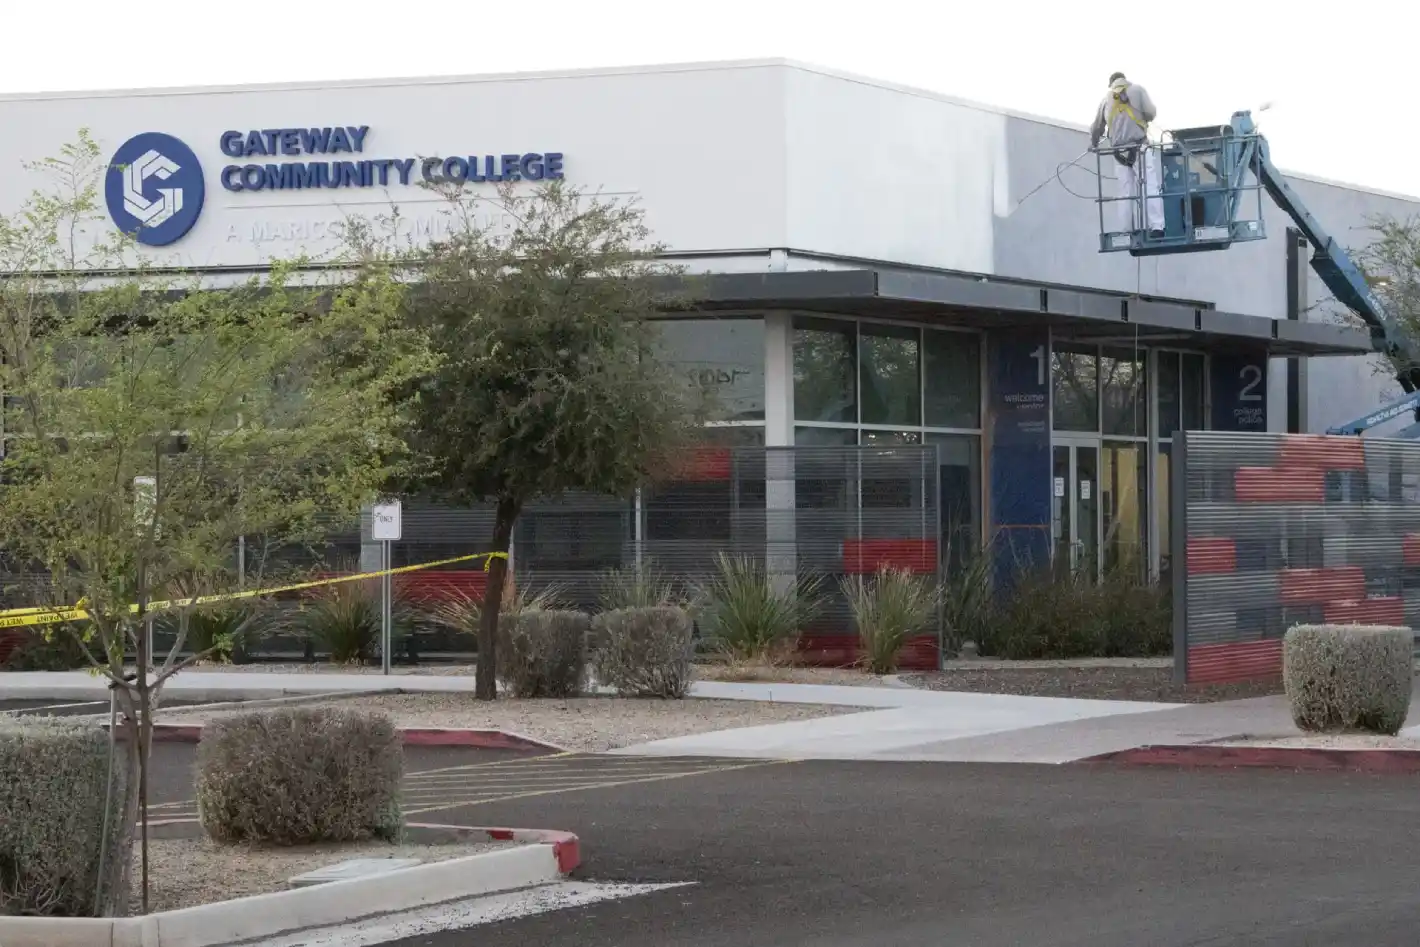 Commercial Painting Contractors for Arizona School Districts